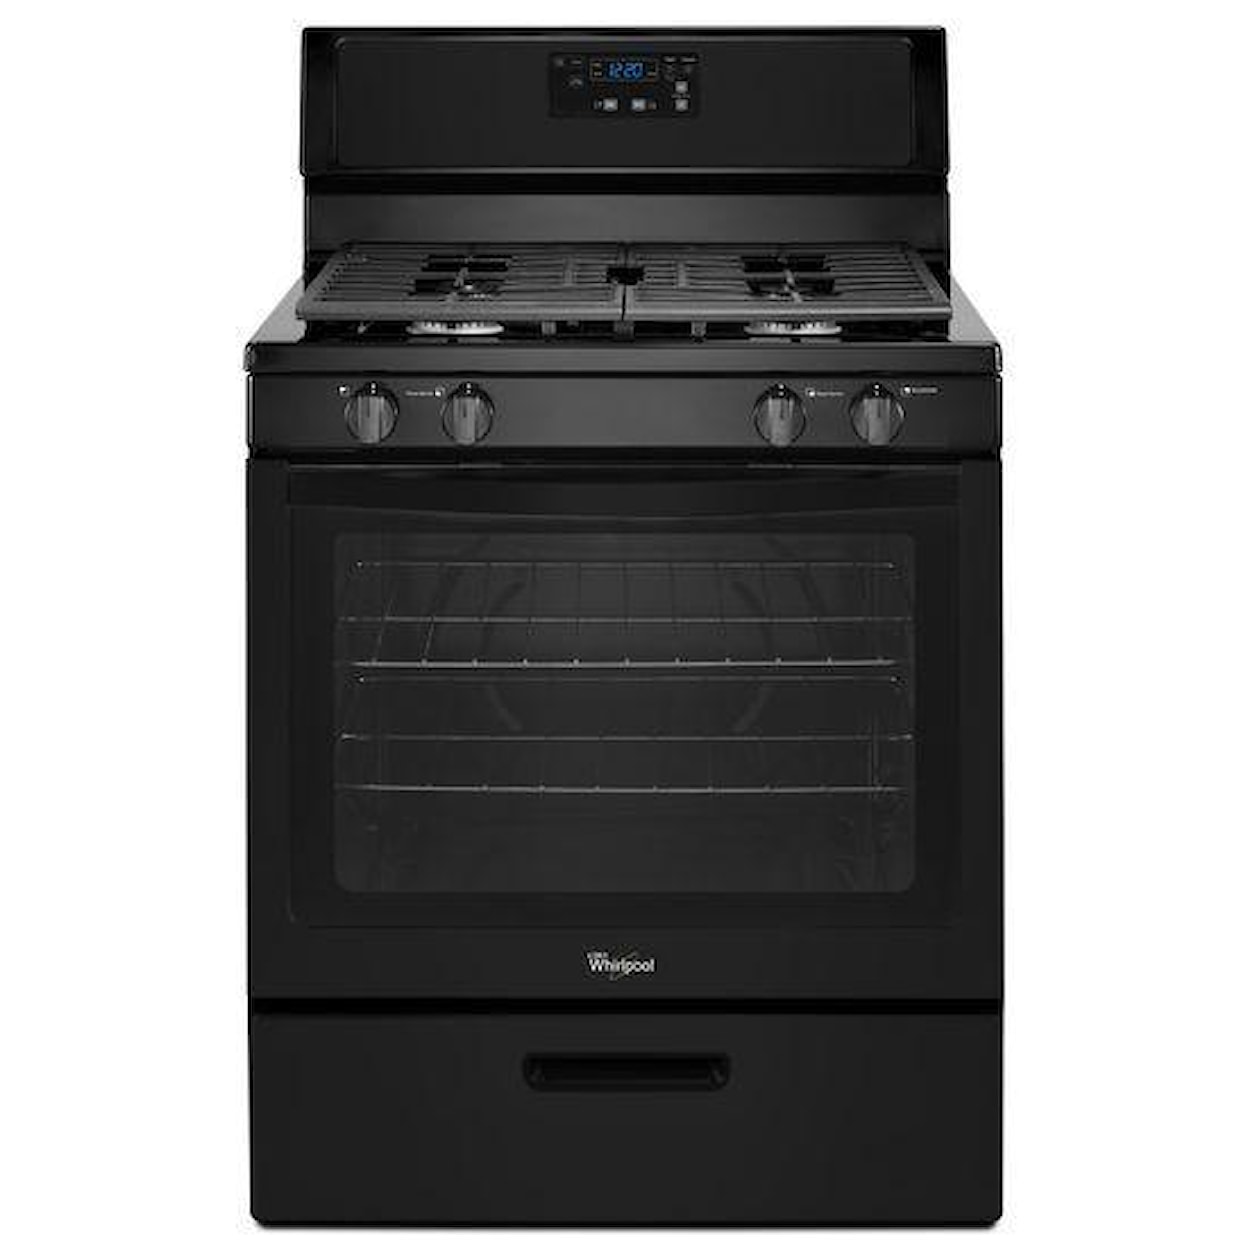 Whirlpool Gas Ranges 5.1 cu. ft. Freestanding Gas Range with Unde